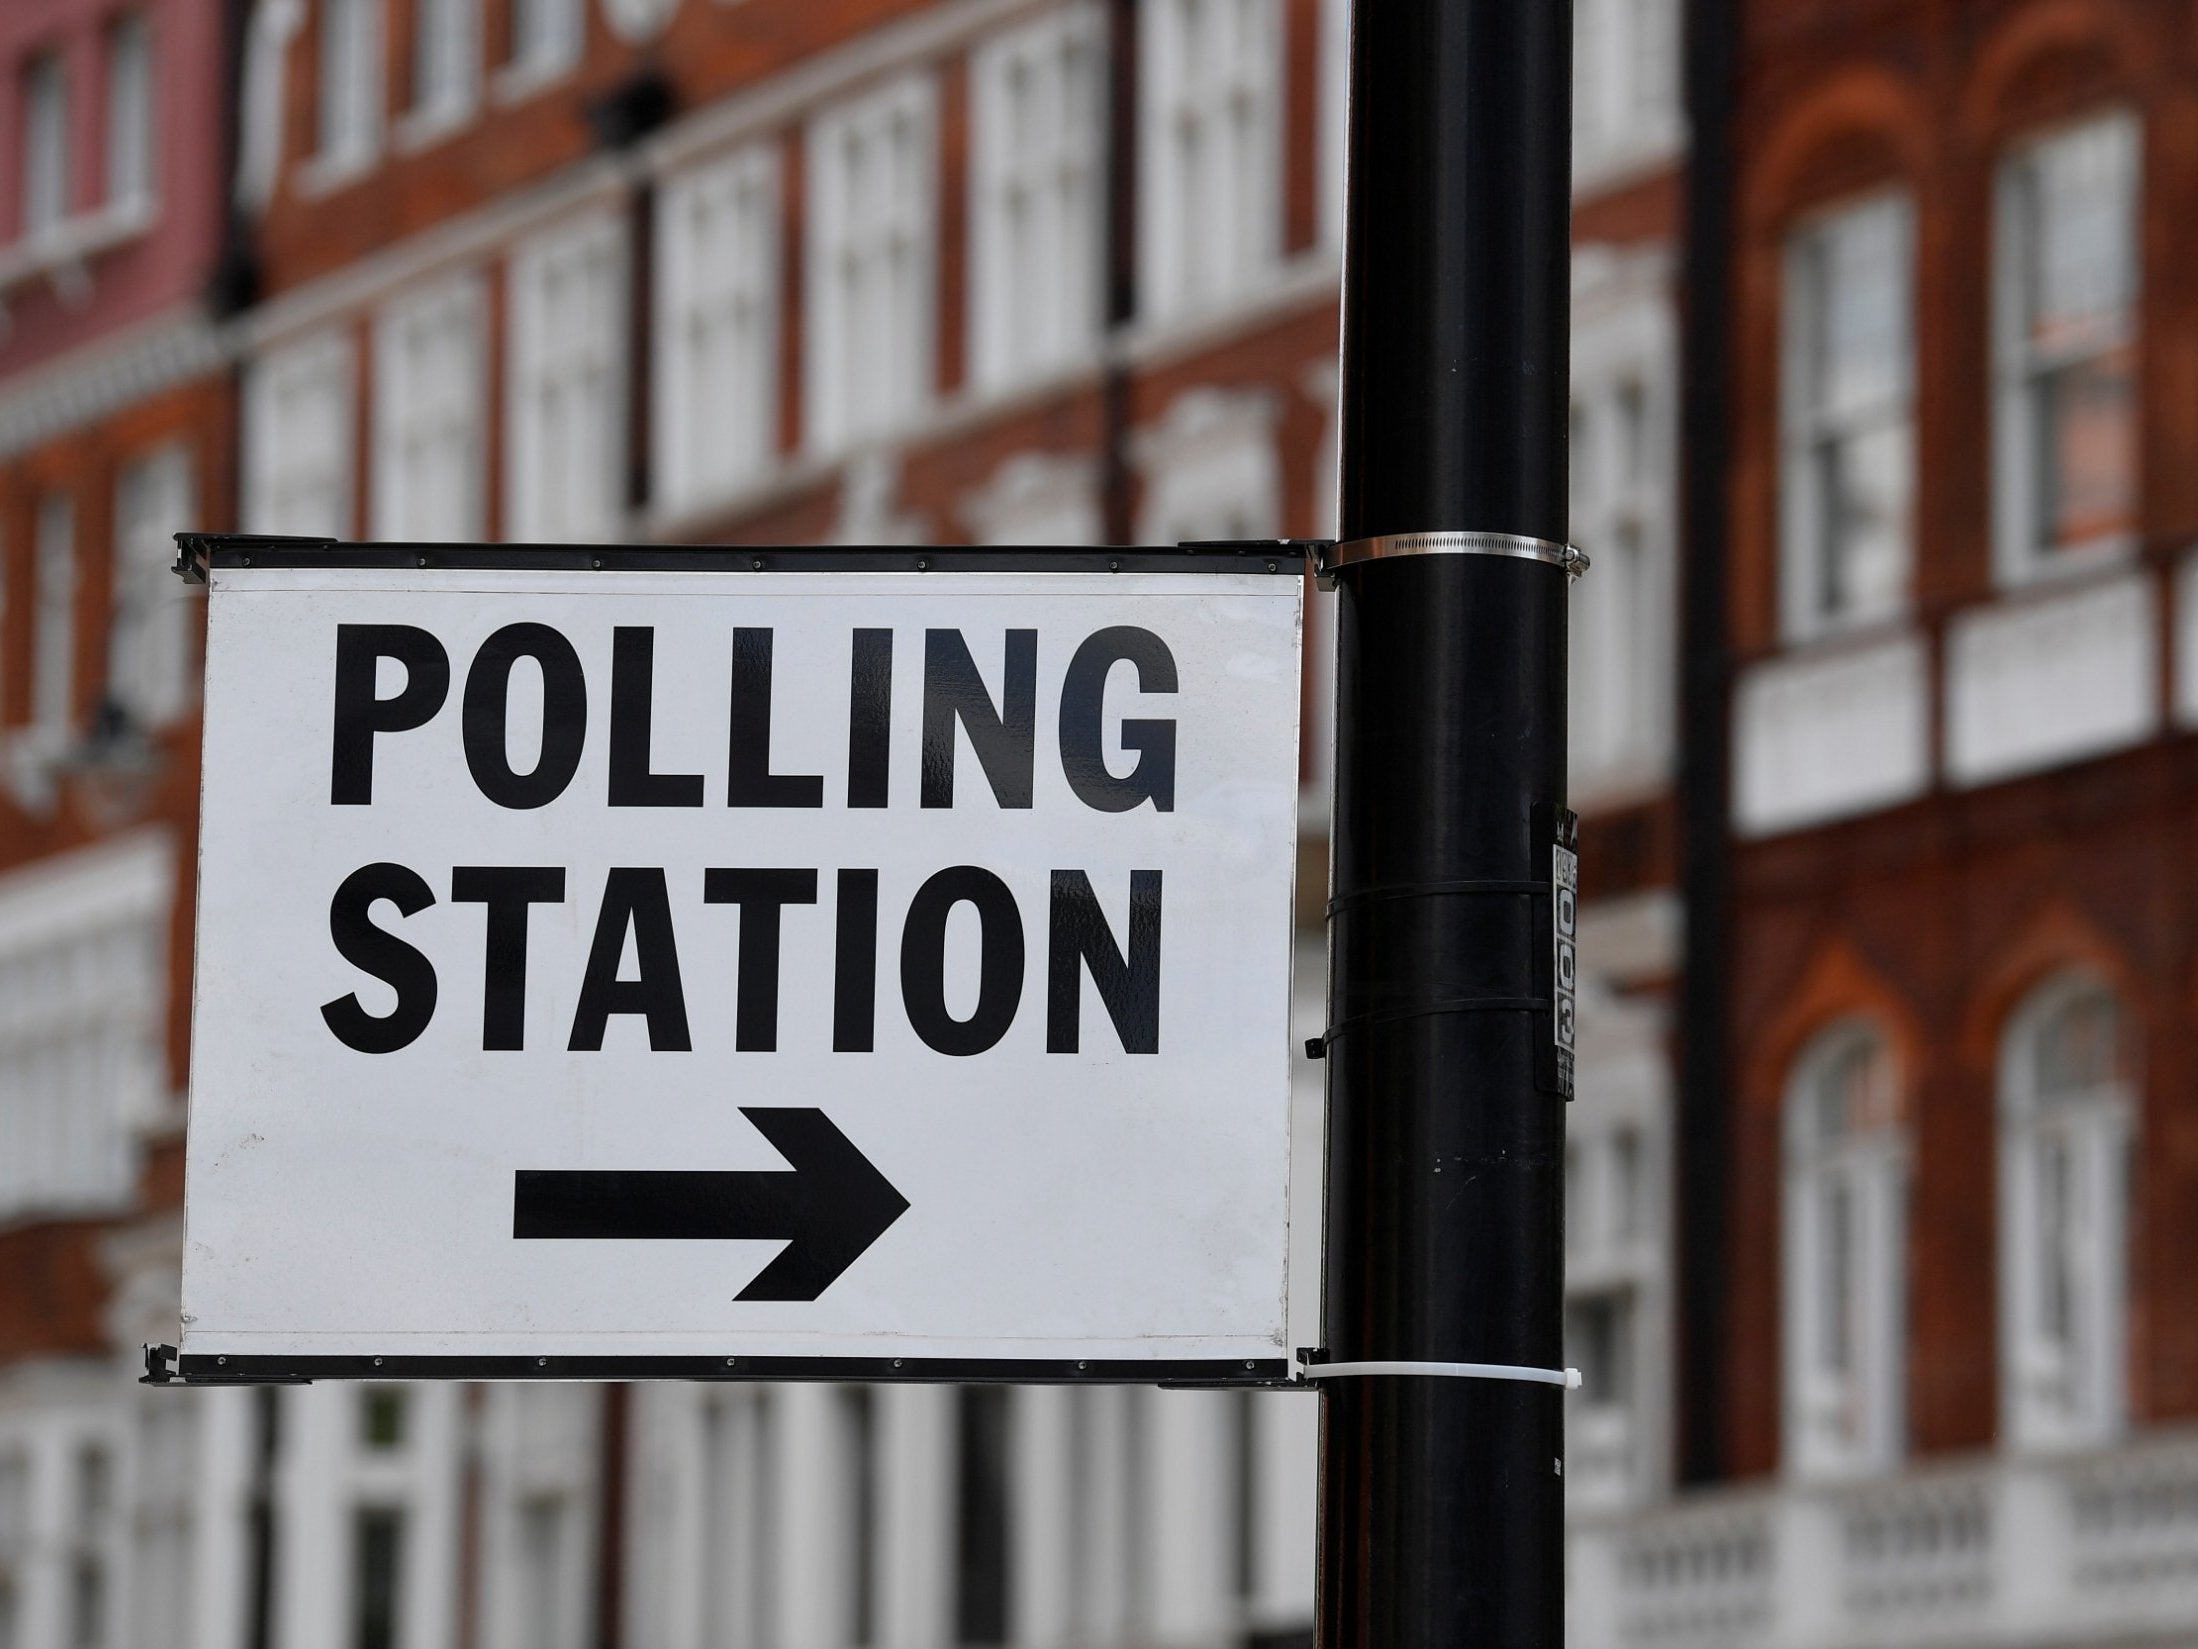 Voters were turned away from the polling station in Highgate on Thursday morning as police assessed the item